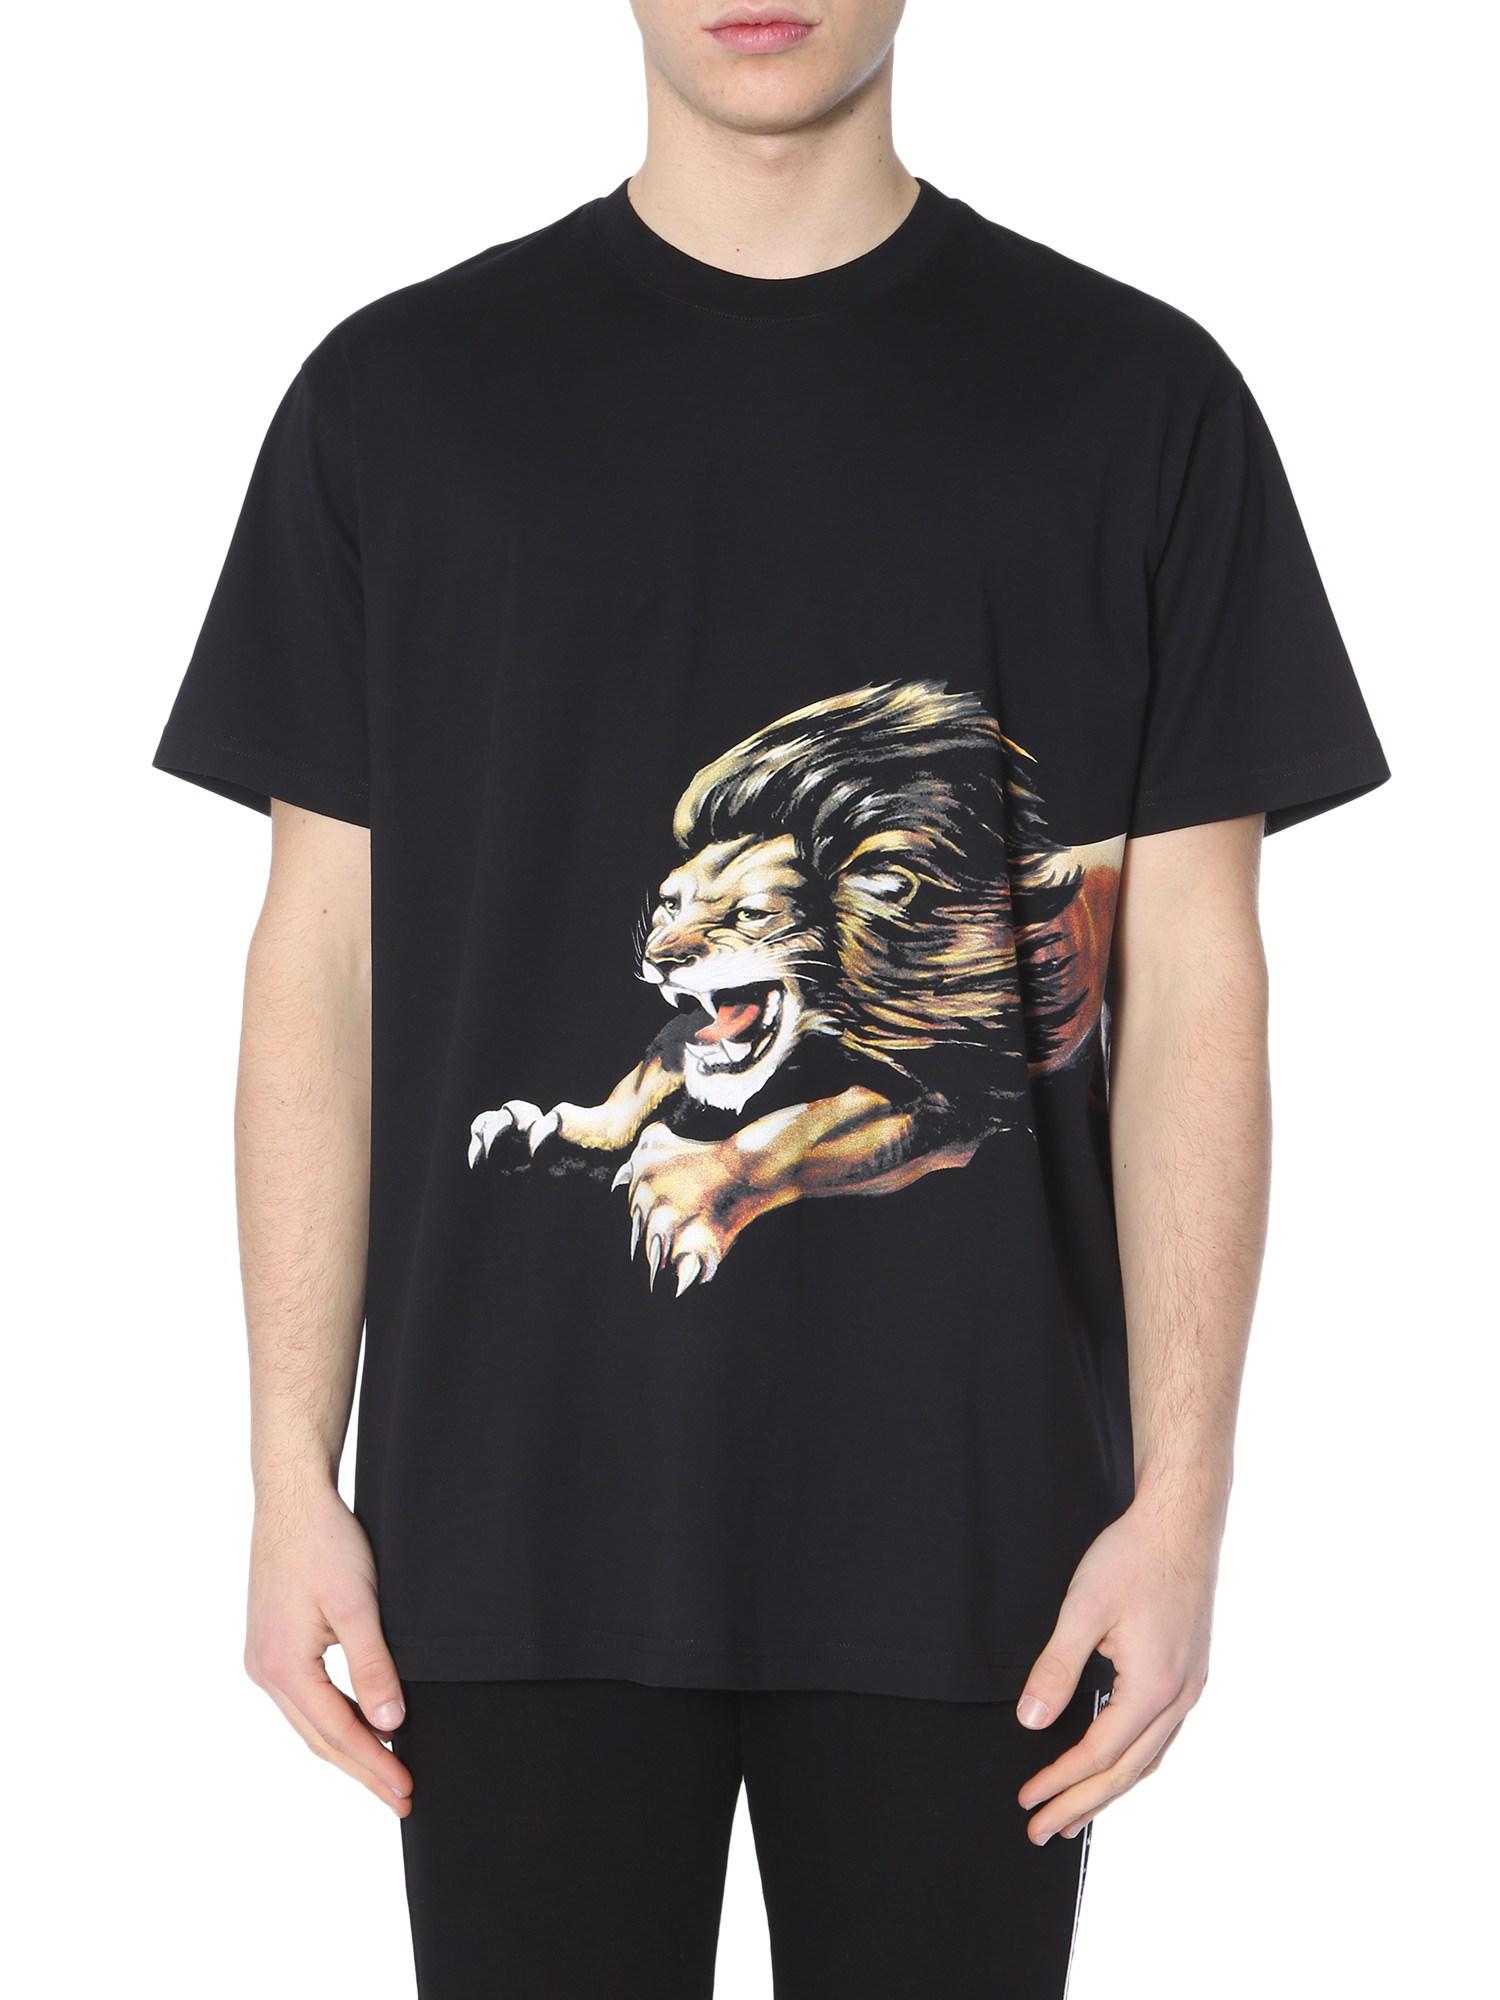 Givenchy Cotton Lion Print T-shirt in Black for Men - Lyst